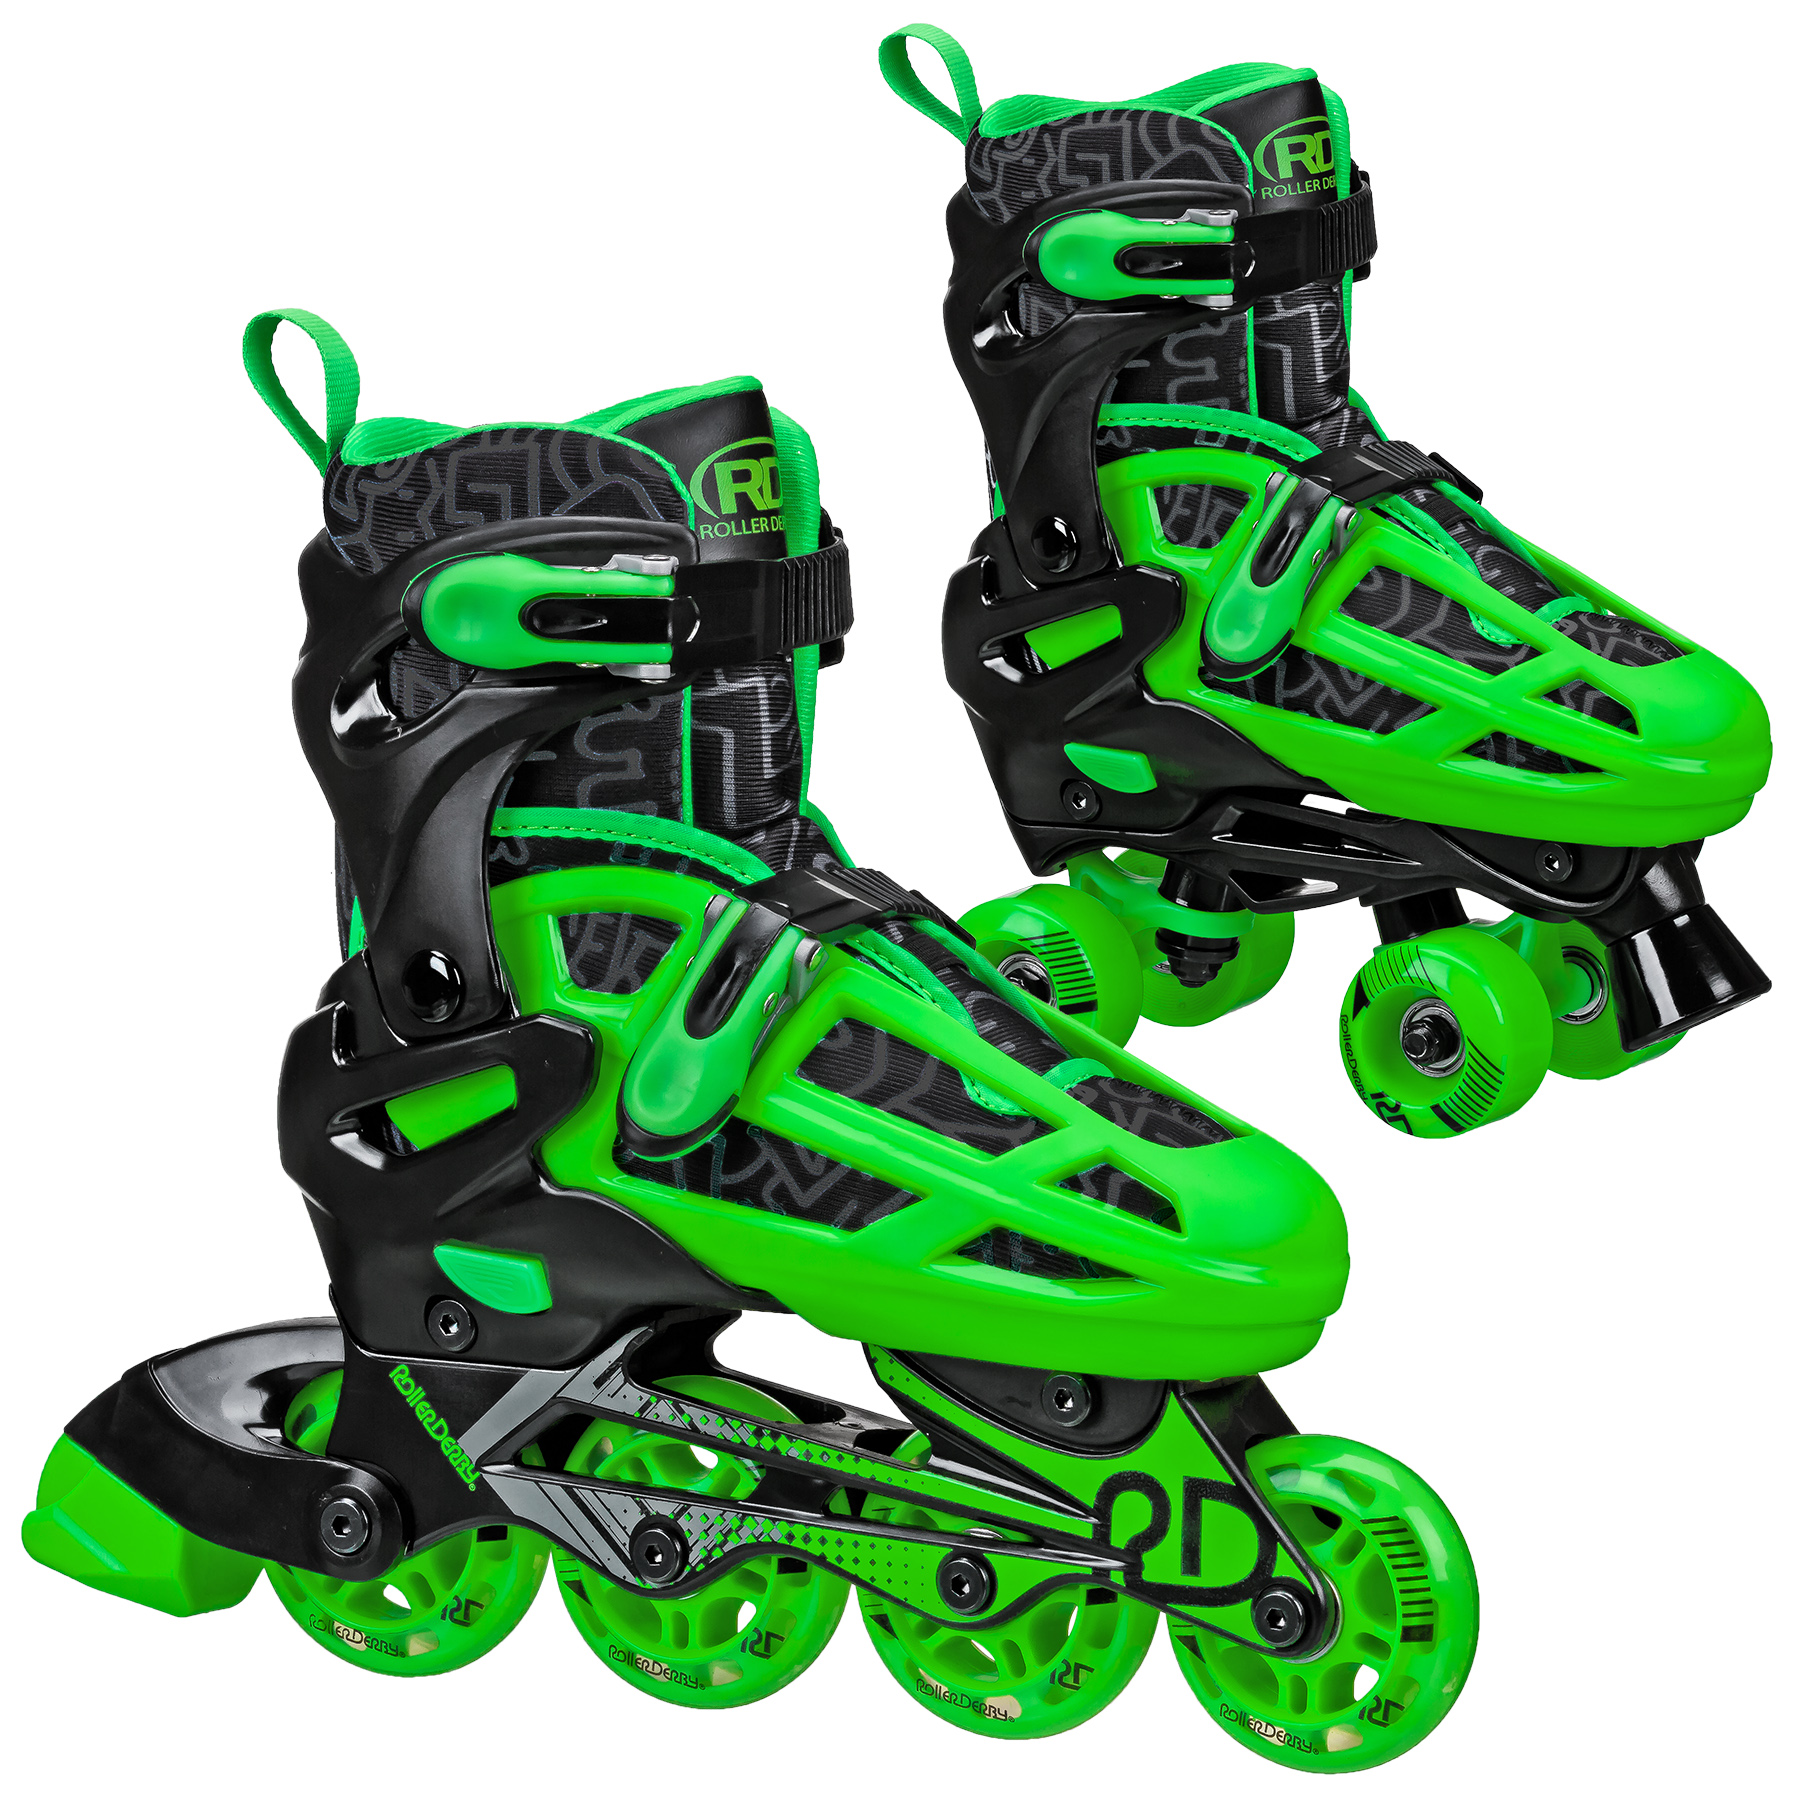 How Much Do Rollerblades Cost?